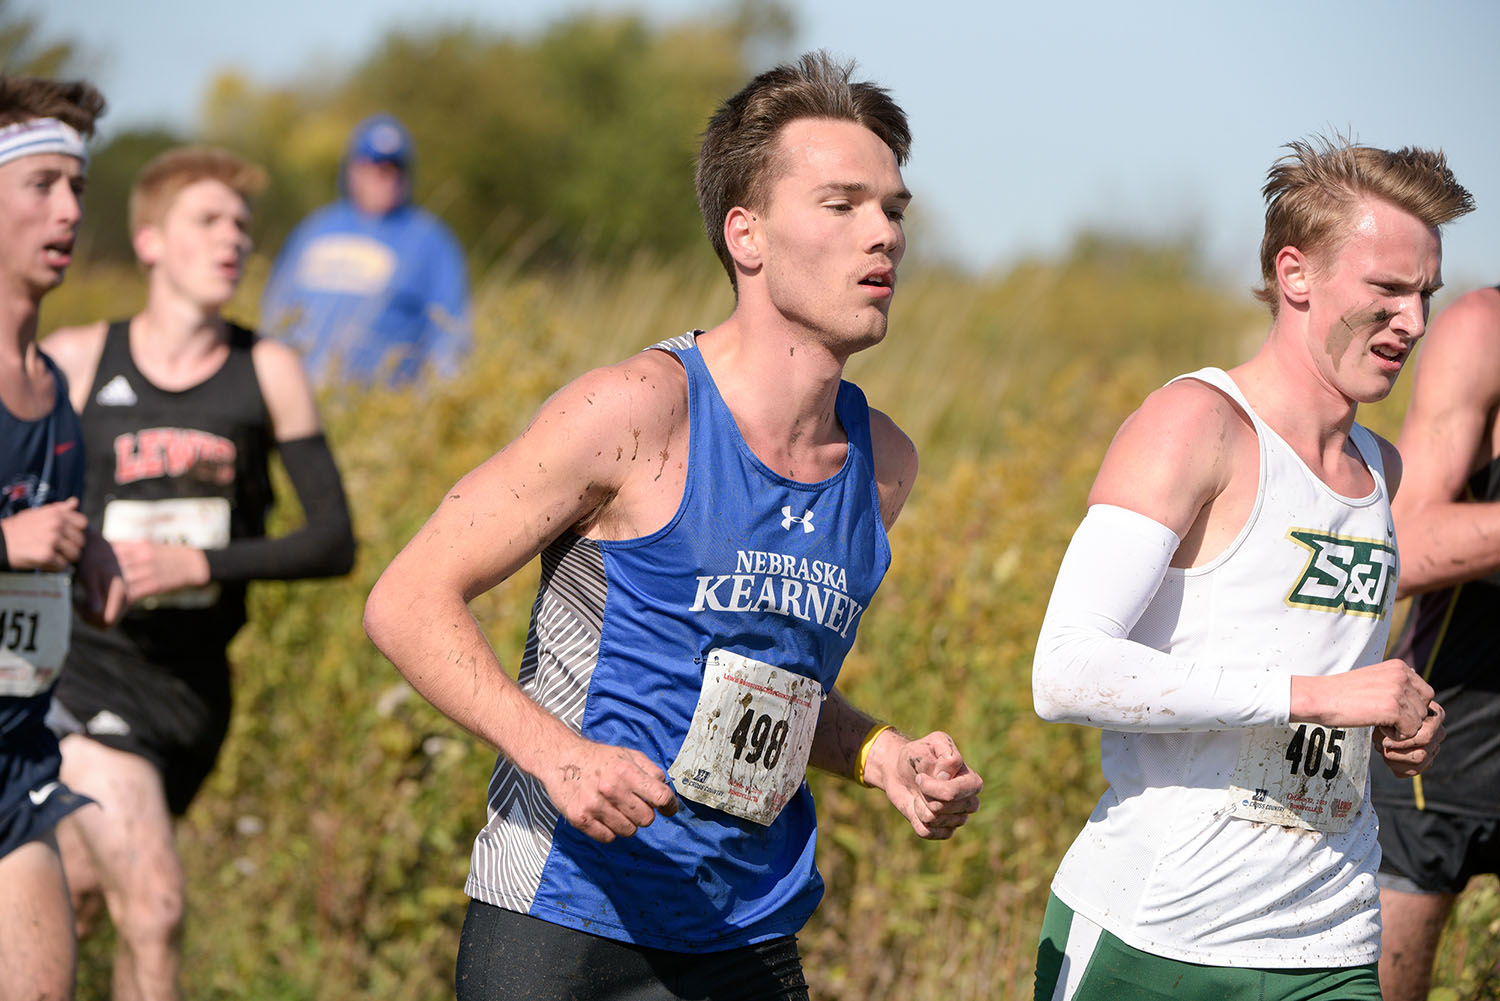 Nate Pierce, center, competed on the UNK cross country and track teams while maintaining a 3.6 GPA. (Steve Woltmann Photography)